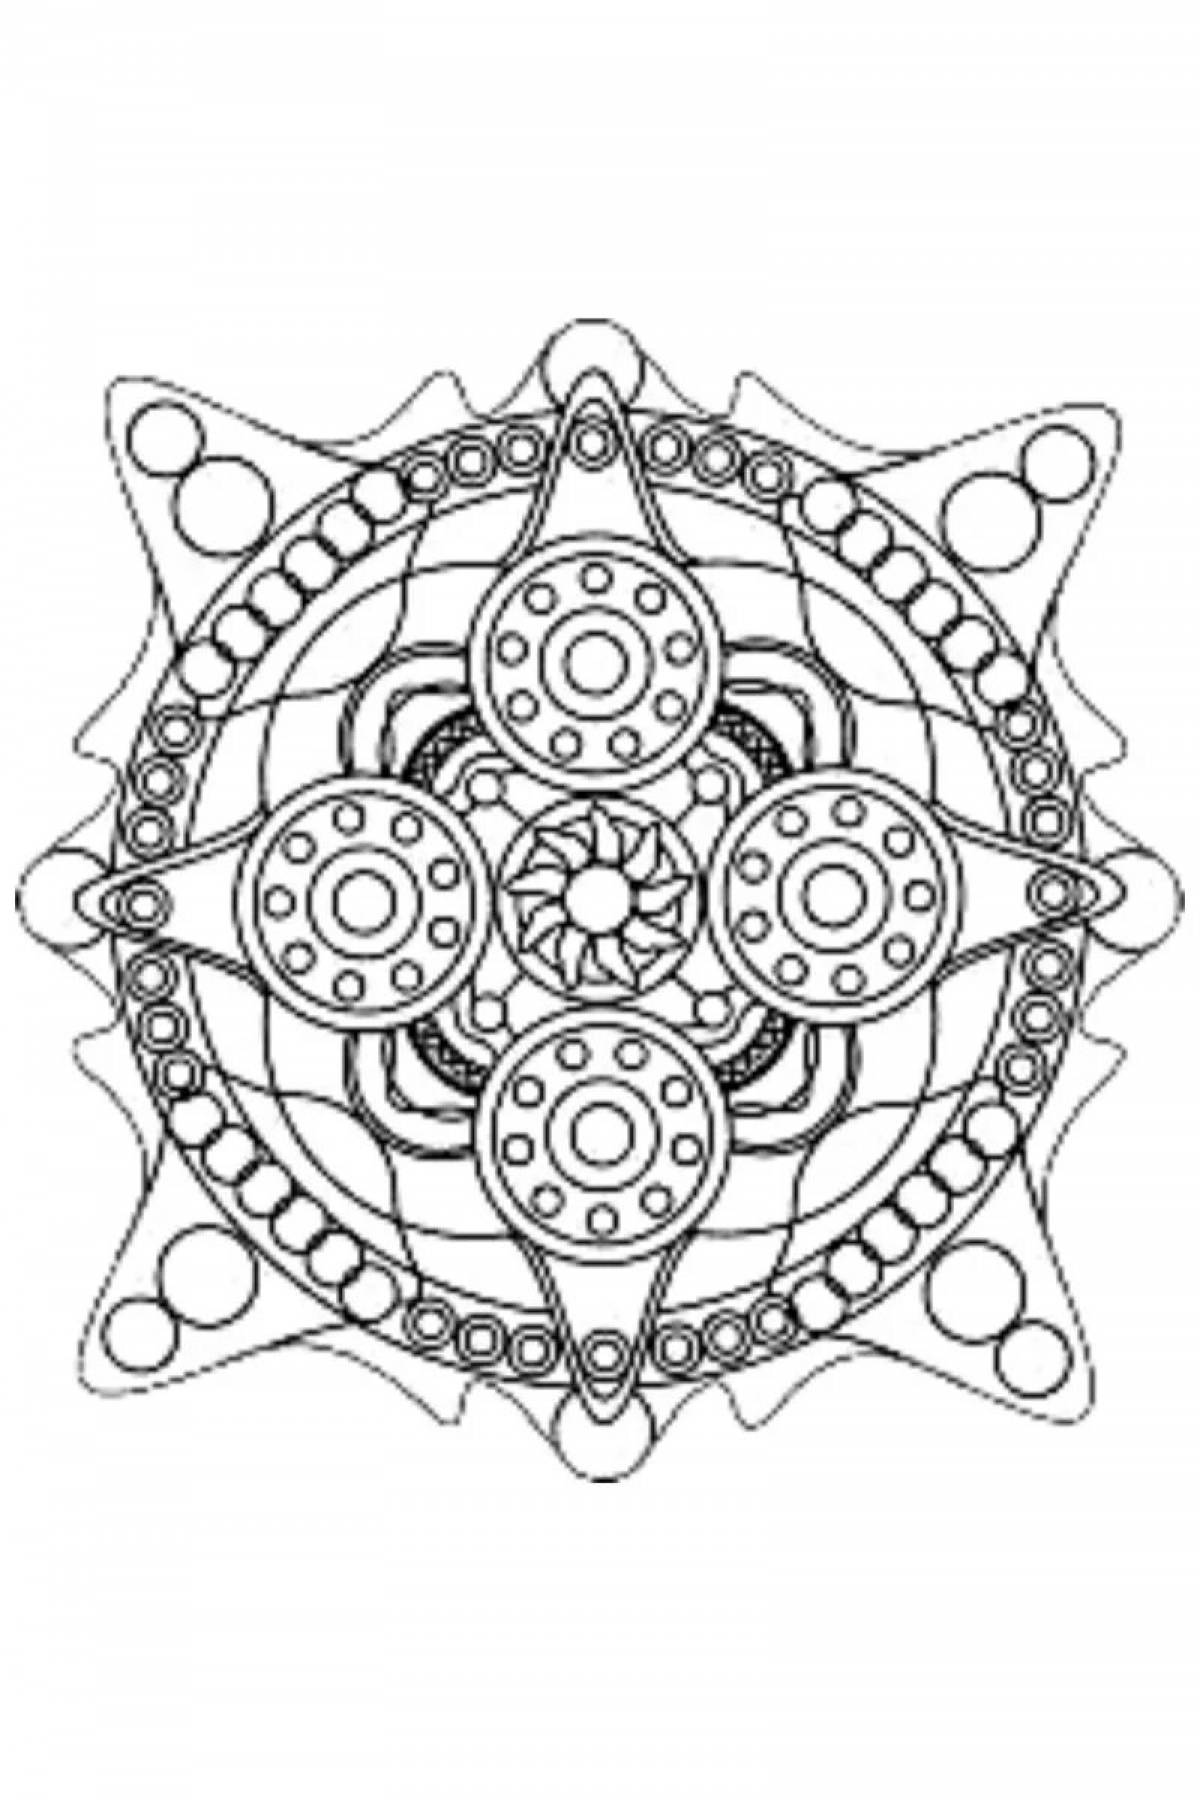 Great coloring mandala for fulfillment and prosperity